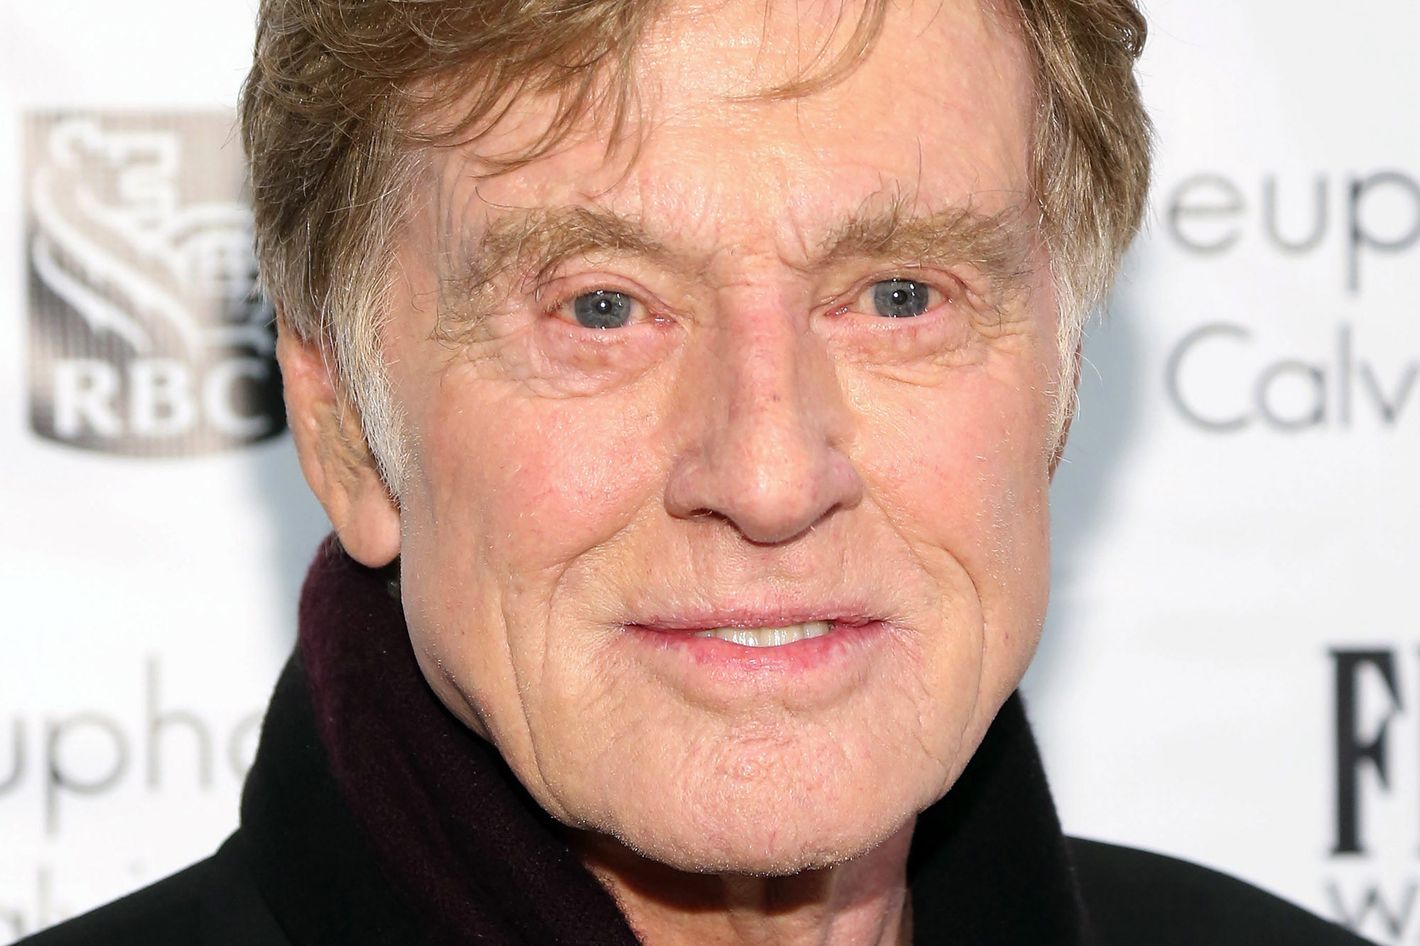 Actor Robert Redford blasts current political climate | Fox News Video